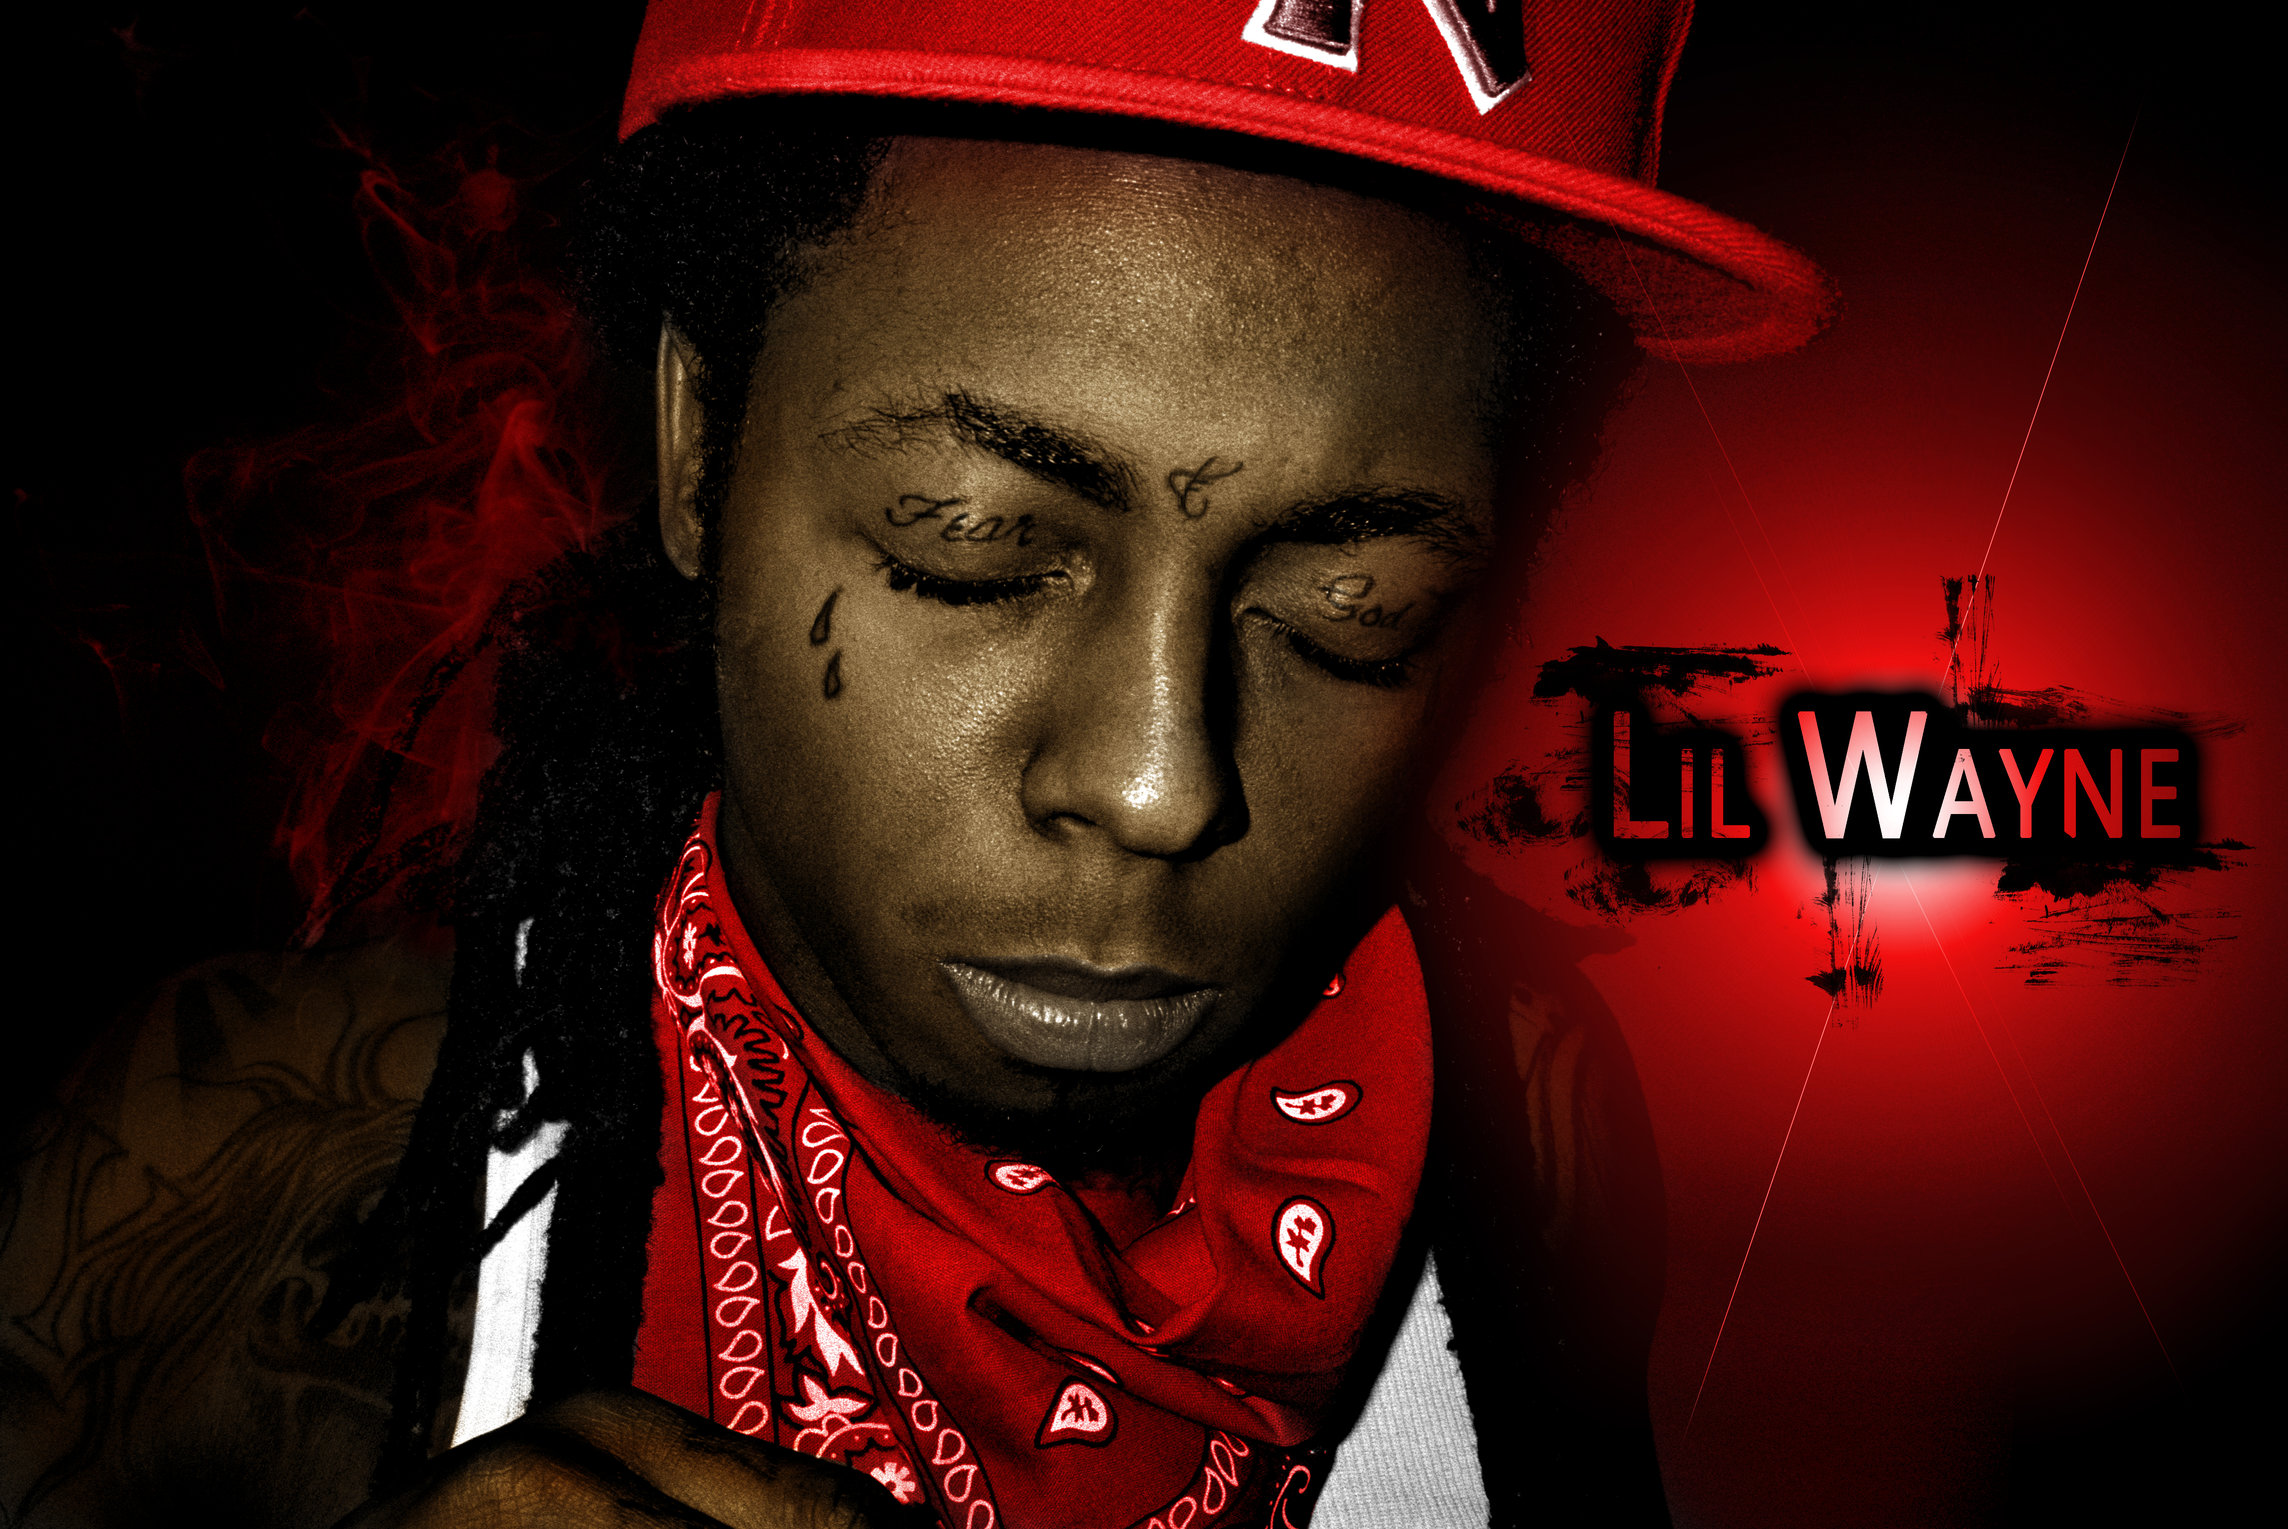 Old Lil Wayne Black and White picture colored